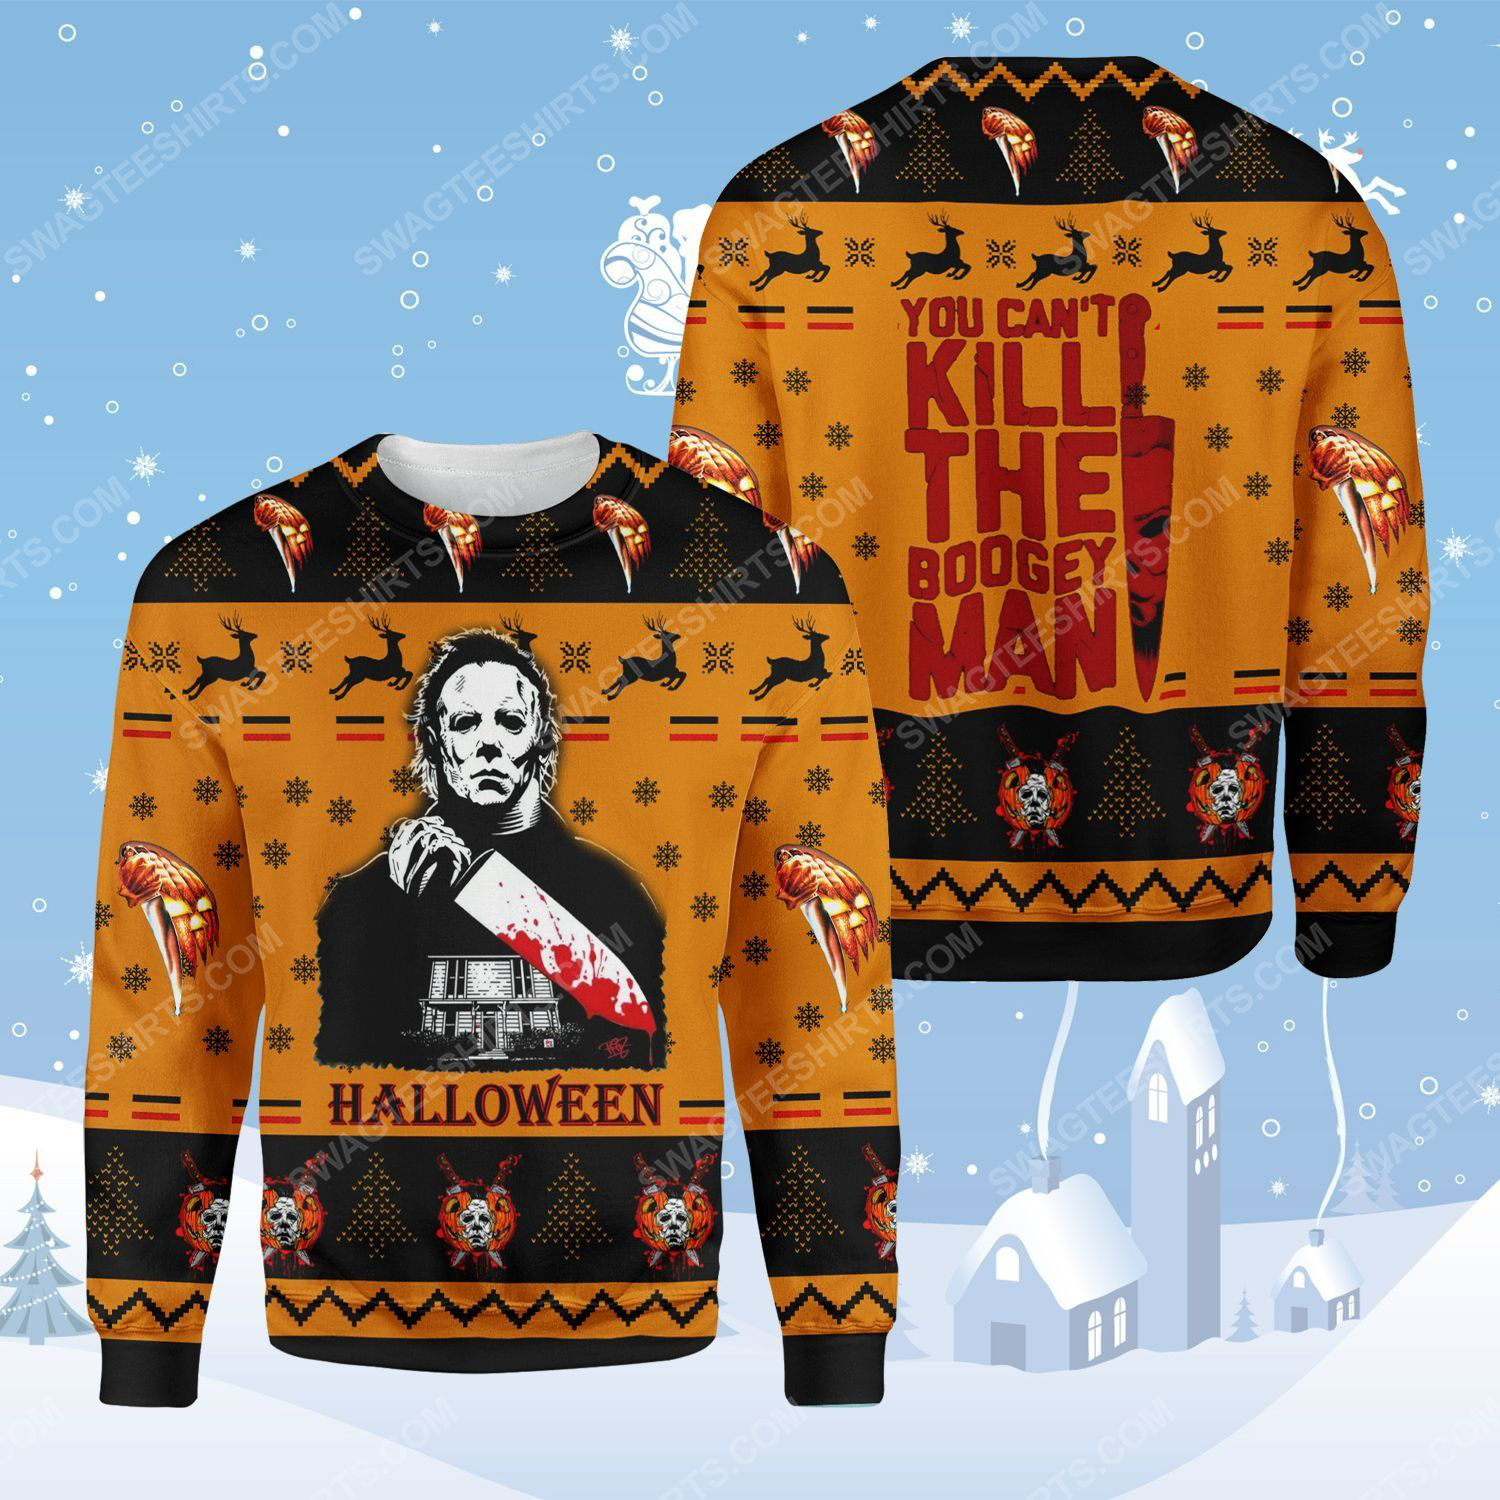 Halloween michael myers you can't kill the bogeyman ​ugly christmas sweater - Copy (2)